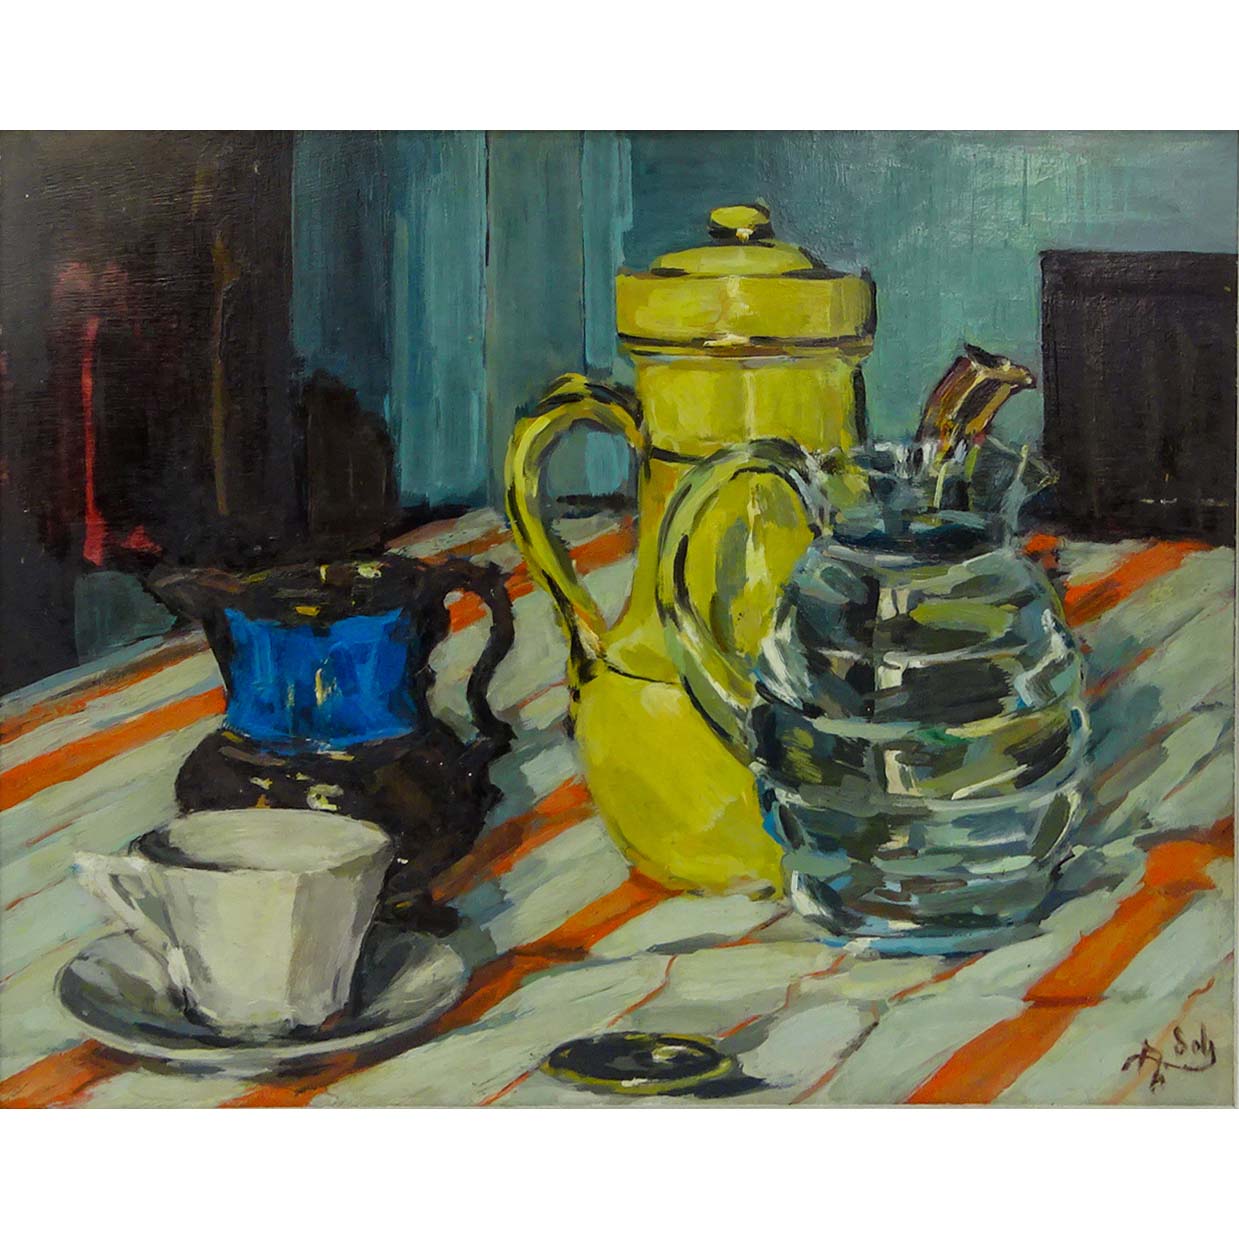 French School (20th Century) "Still Life, Tableware" Oil on Panel Signed Lower Right. 